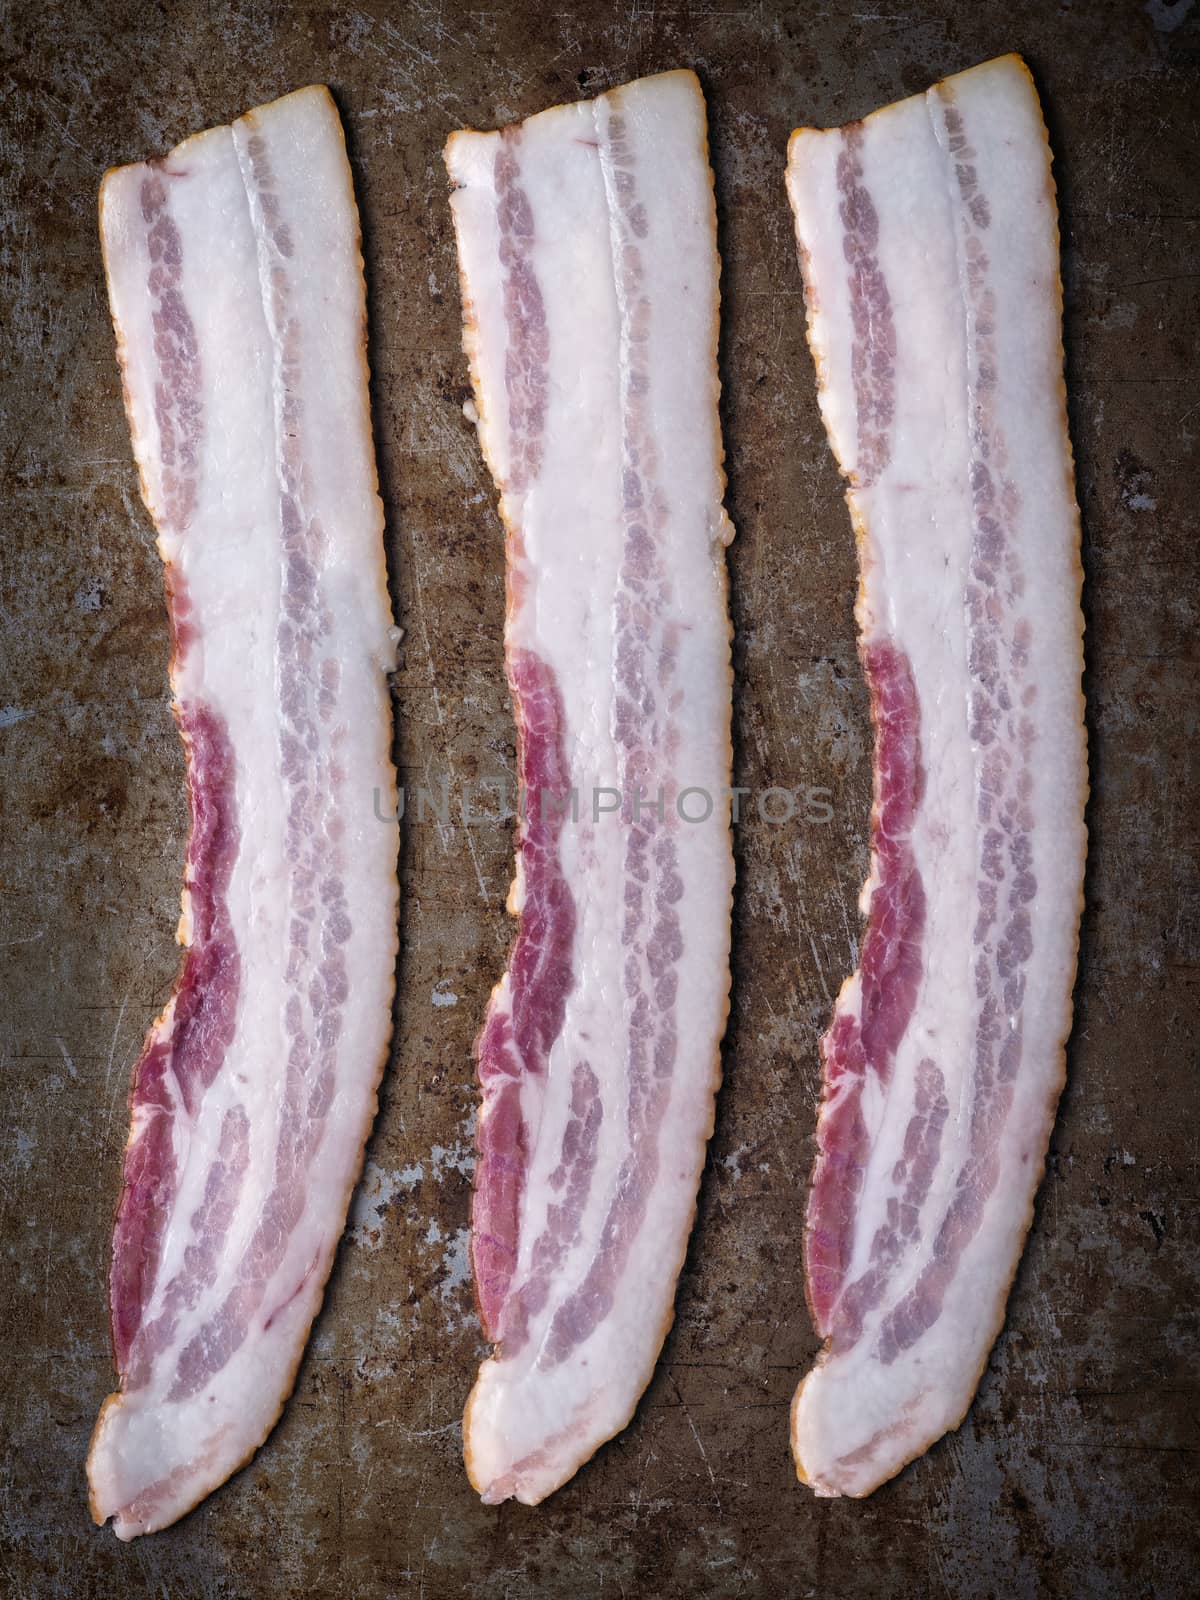 rustic uncooked bacon by zkruger